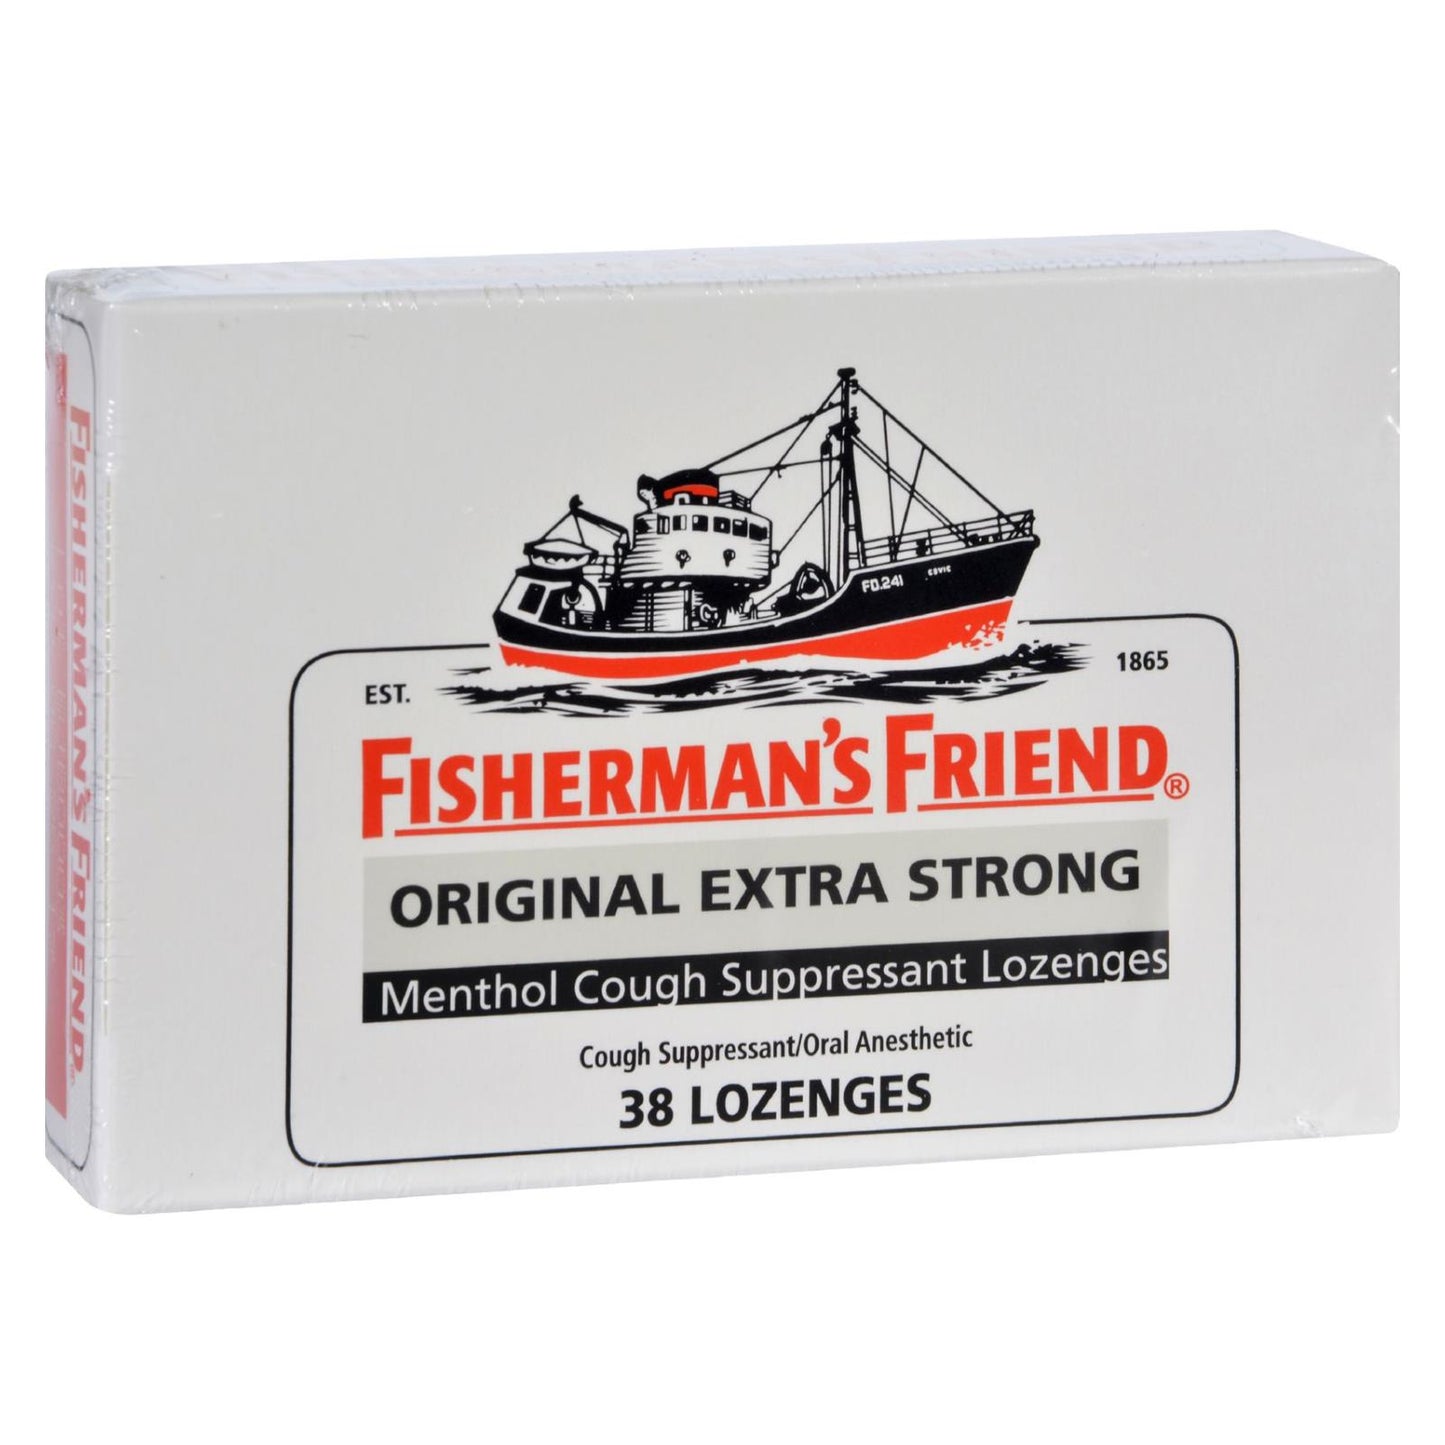 Fisherman's Friend Lozenges - Original Extra Strong, 38 Ct (Case of 6)